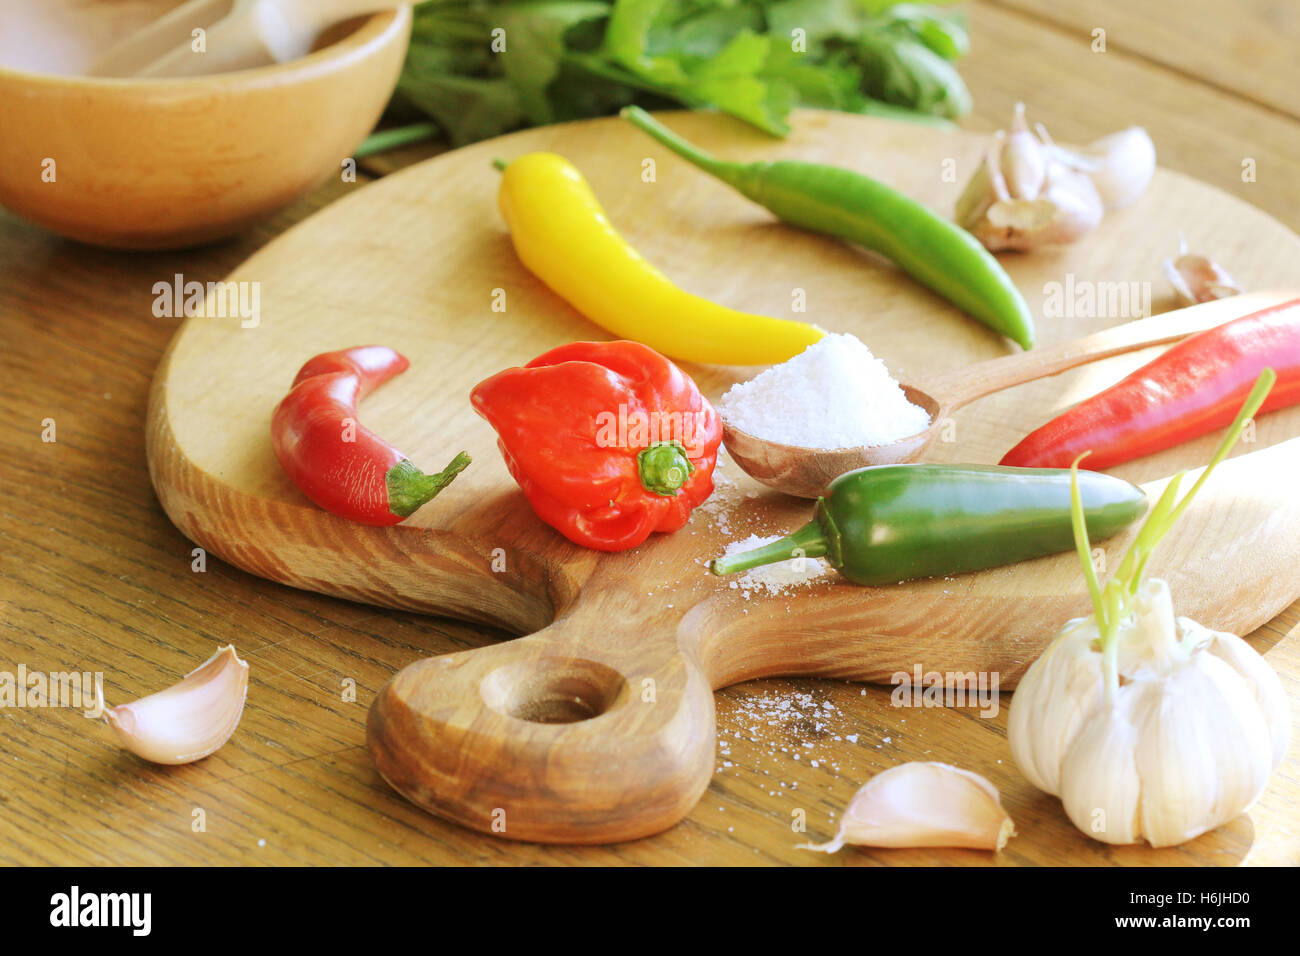 different variety of hot peppers and spices on cutting board Stock Photo